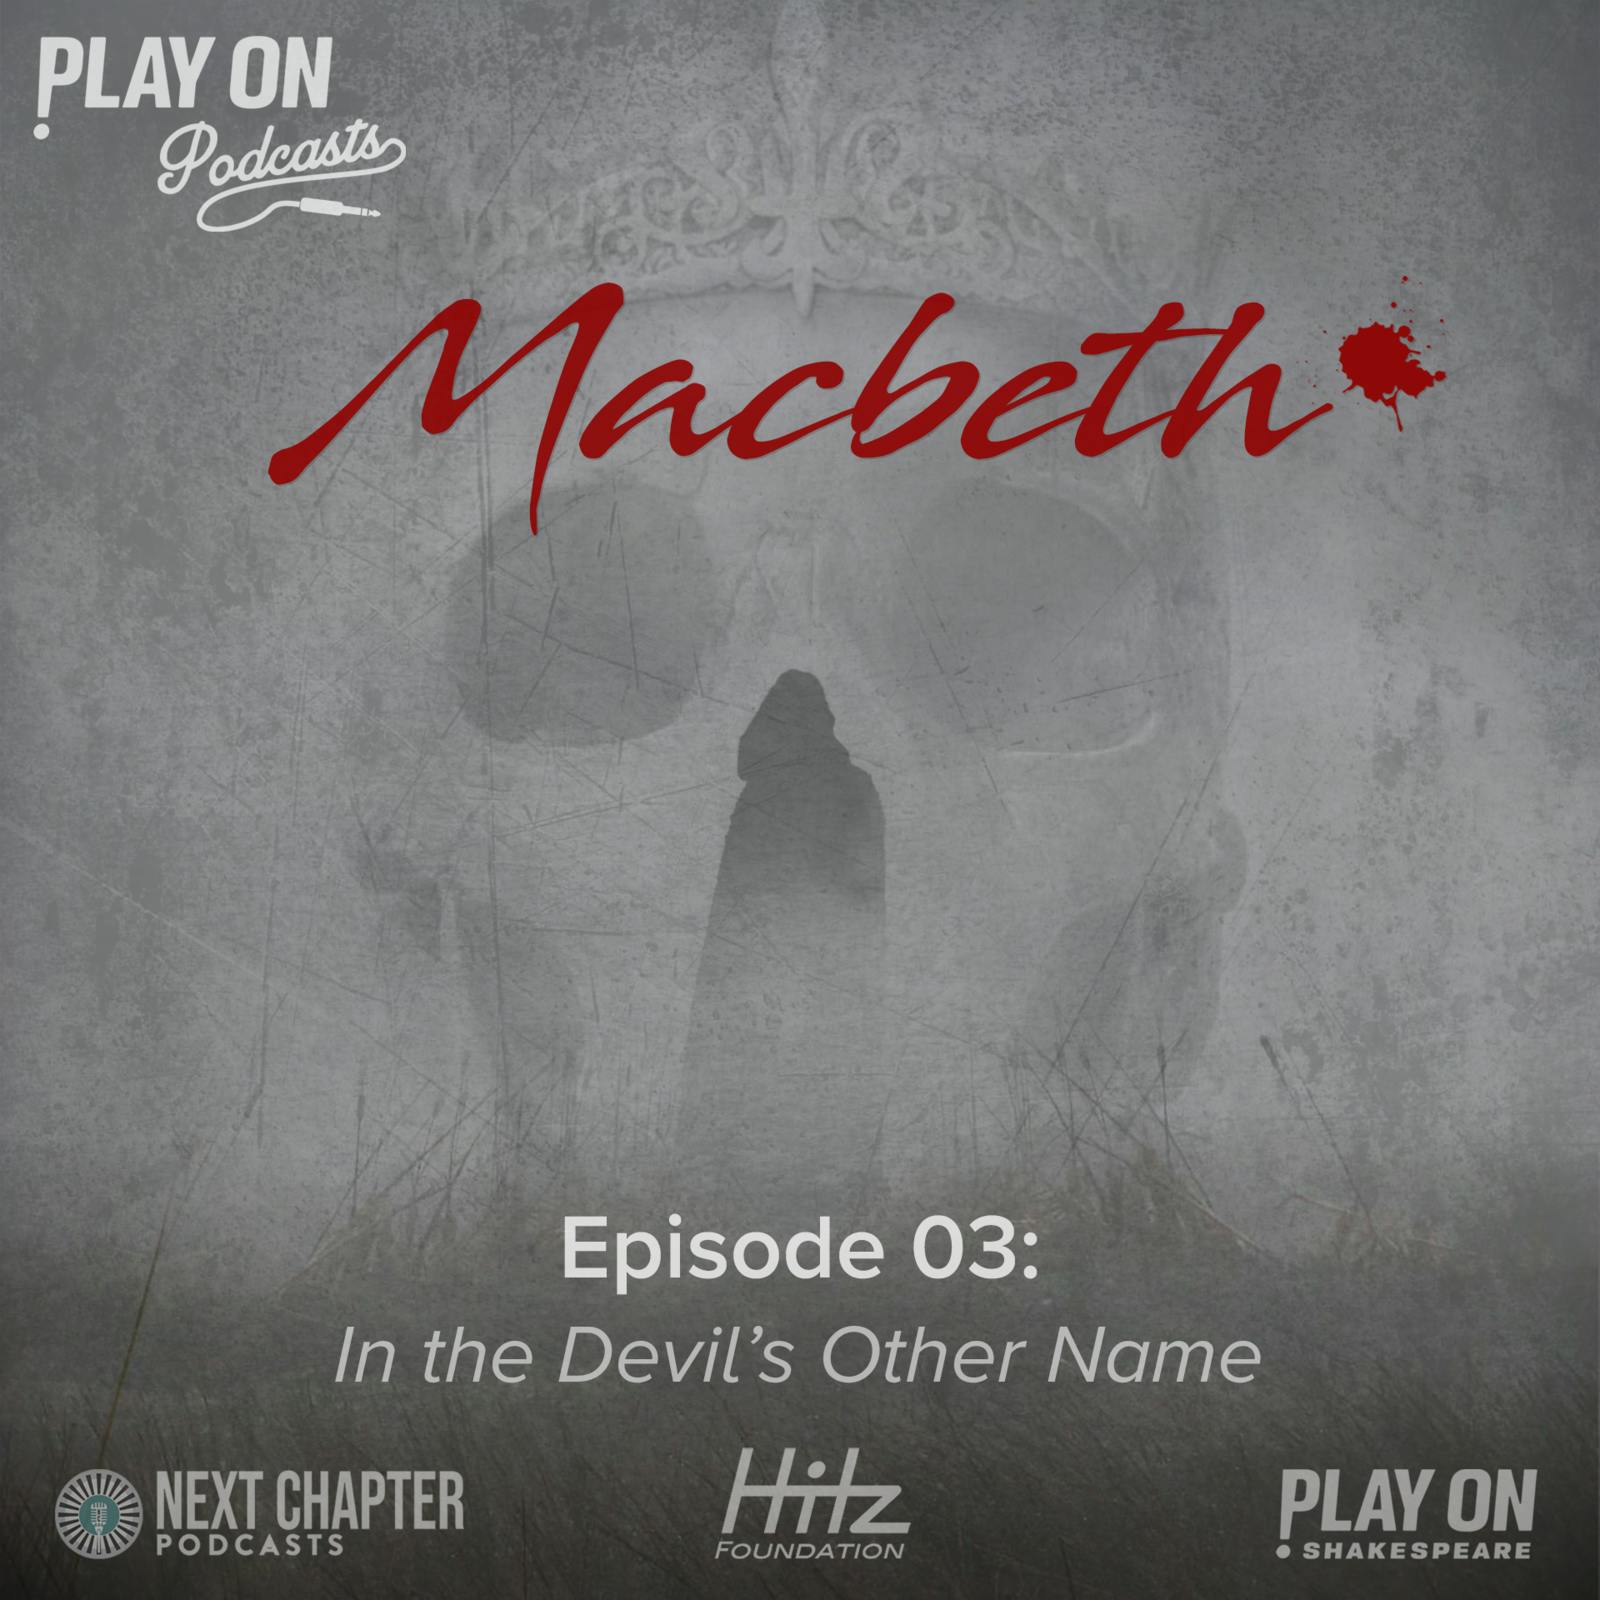 Macbeth - Episode 3 - In the Devil's Other Name